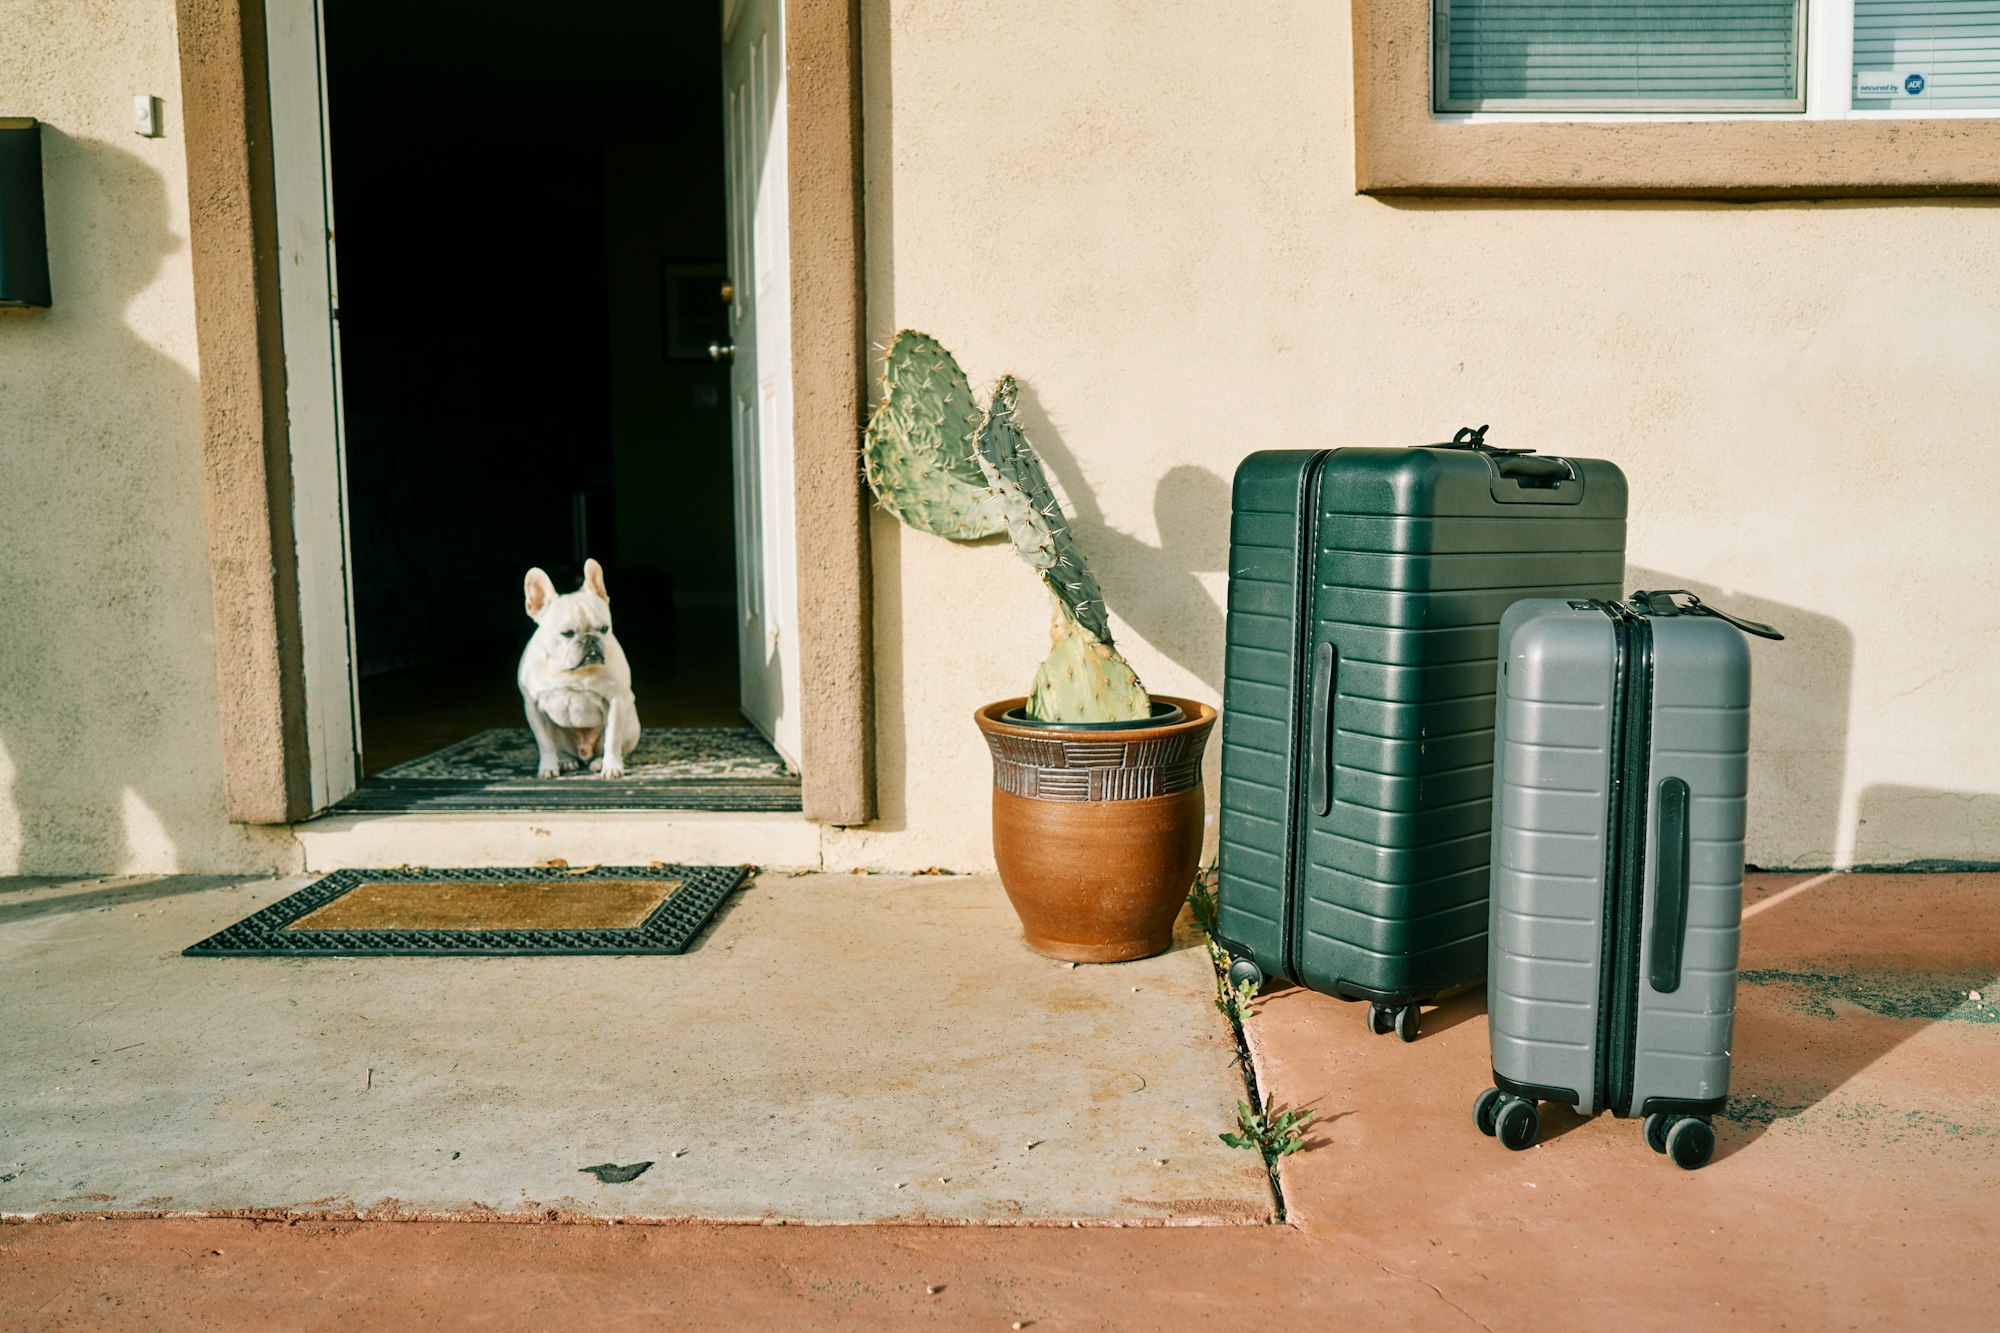 Dog looking at luggages